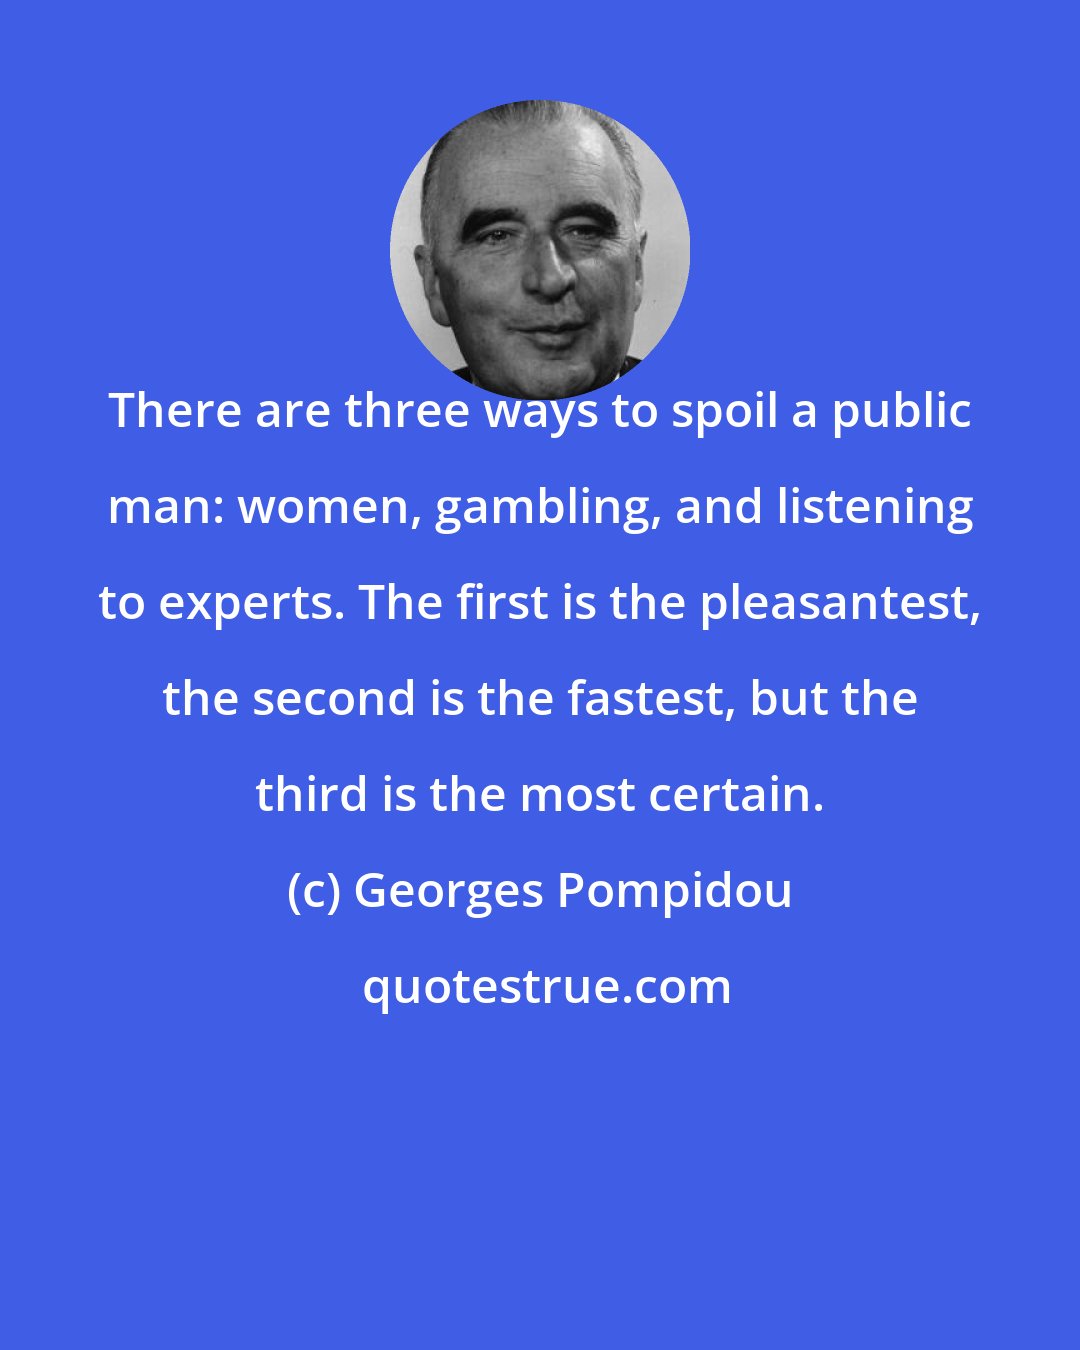 Georges Pompidou: There are three ways to spoil a public man: women, gambling, and listening to experts. The first is the pleasantest, the second is the fastest, but the third is the most certain.